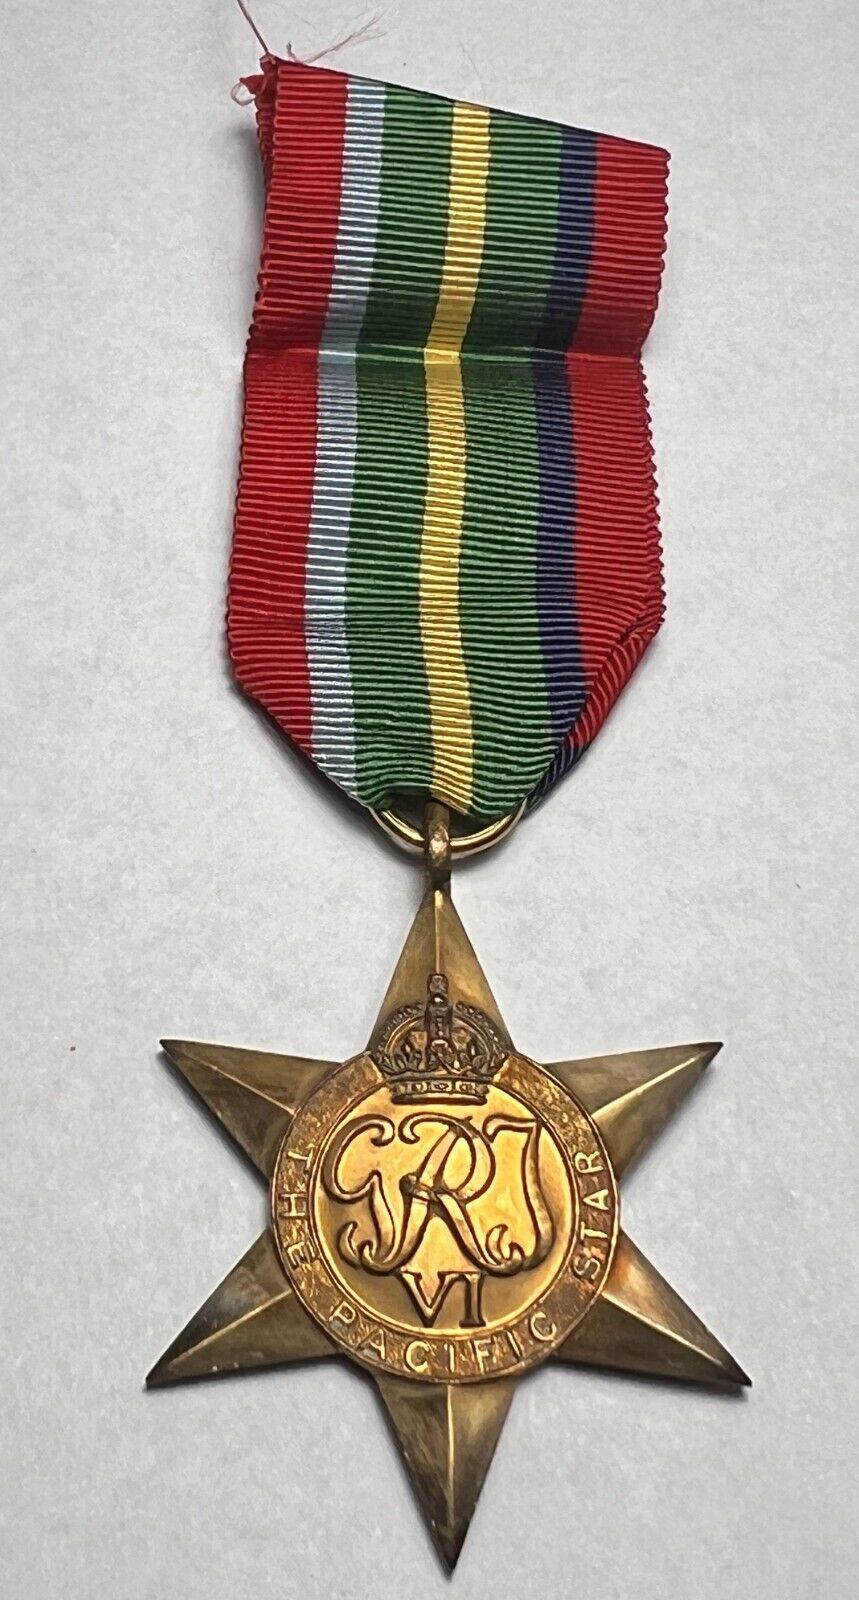 Original WWII Great Britain The Pacific Star Medal 1939-1945 w/ Ribbon